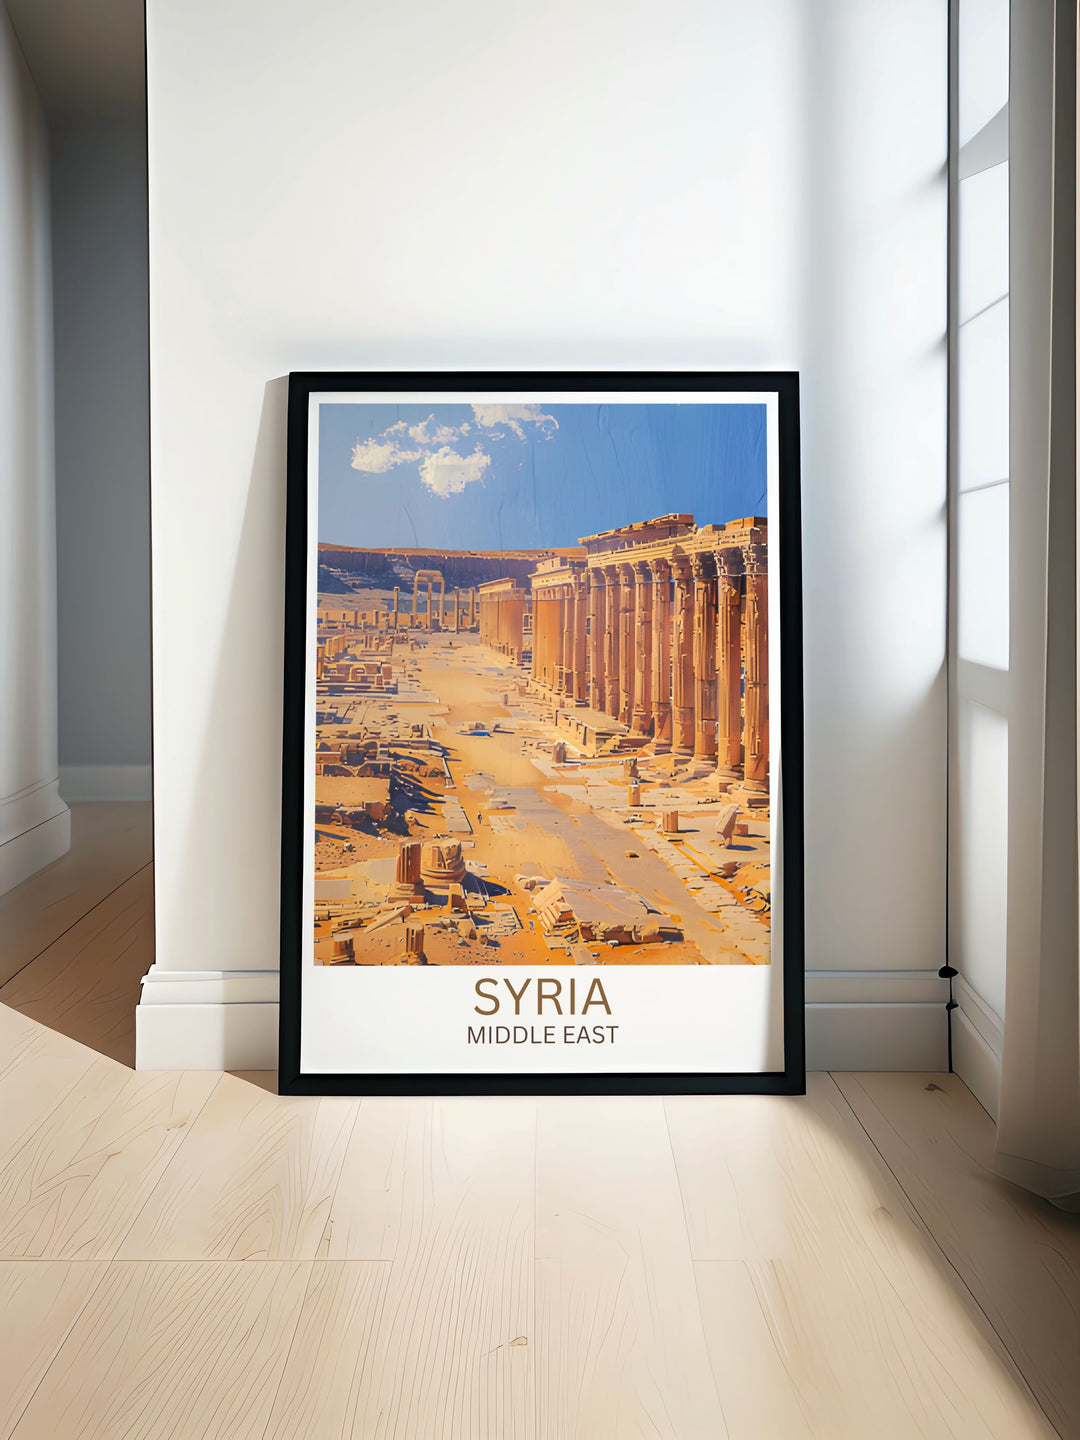 Palmyra poster capturing the sunlit ruins of ancient temples, perfect for adding a touch of historical elegance to any room decor.